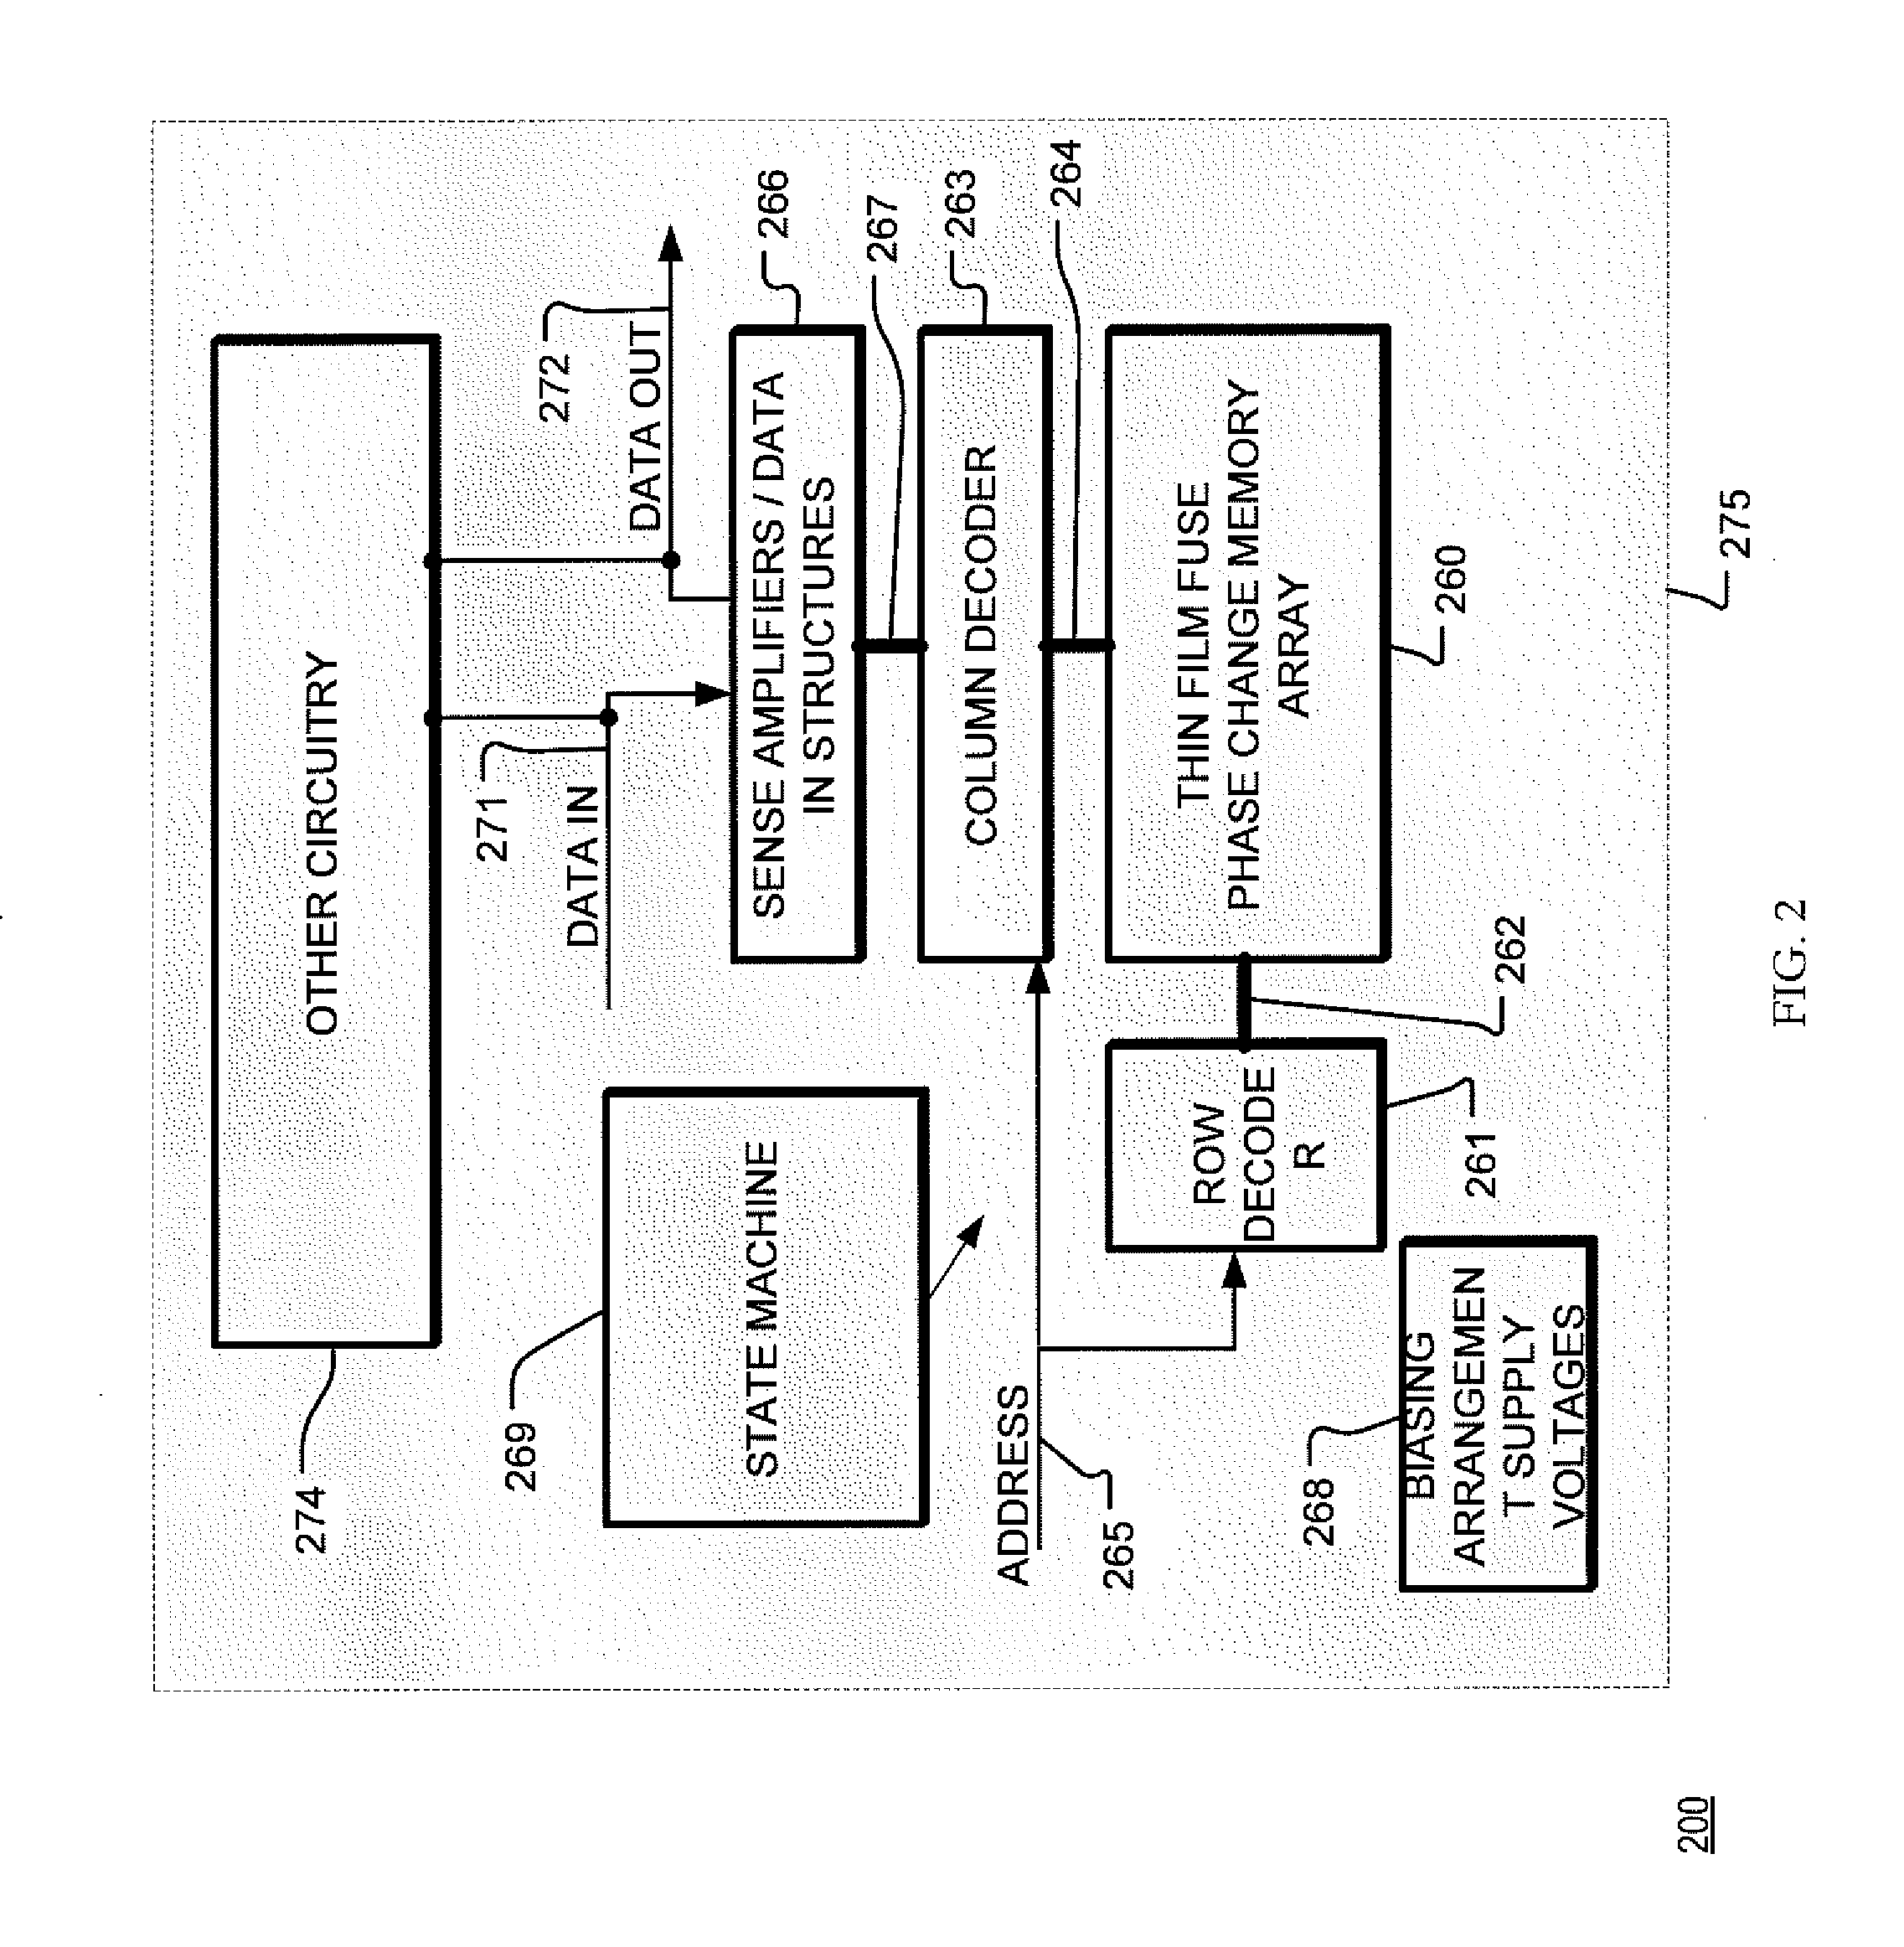 Bridge Resistance Random Access Memory Device and Method With A Singular Contact Structure